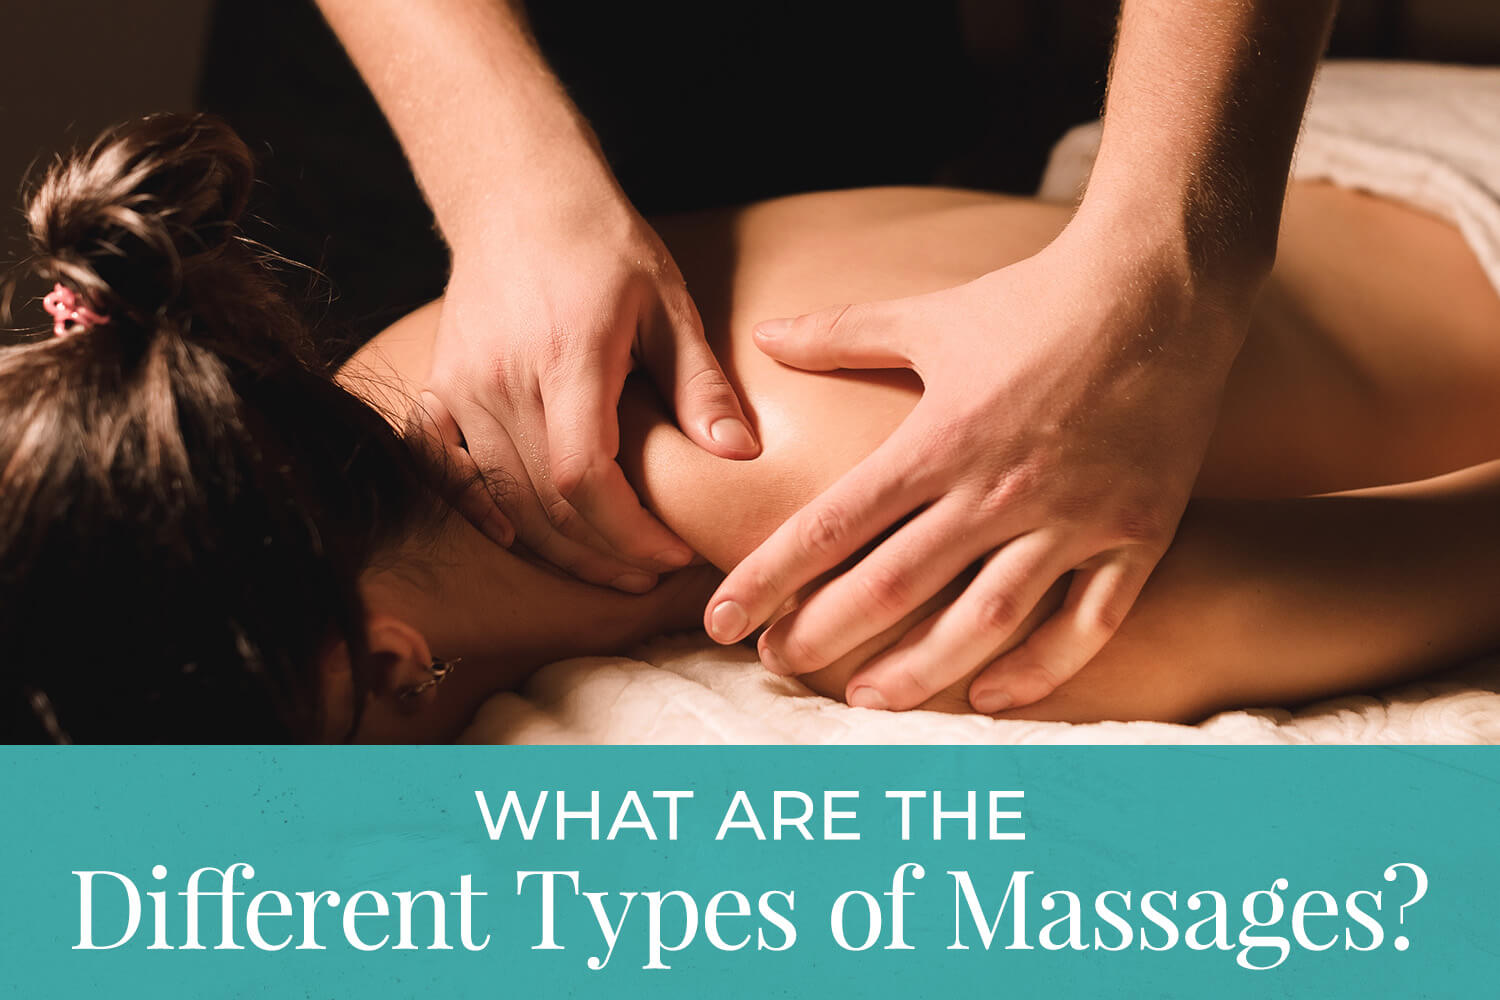 What are the different types of massages